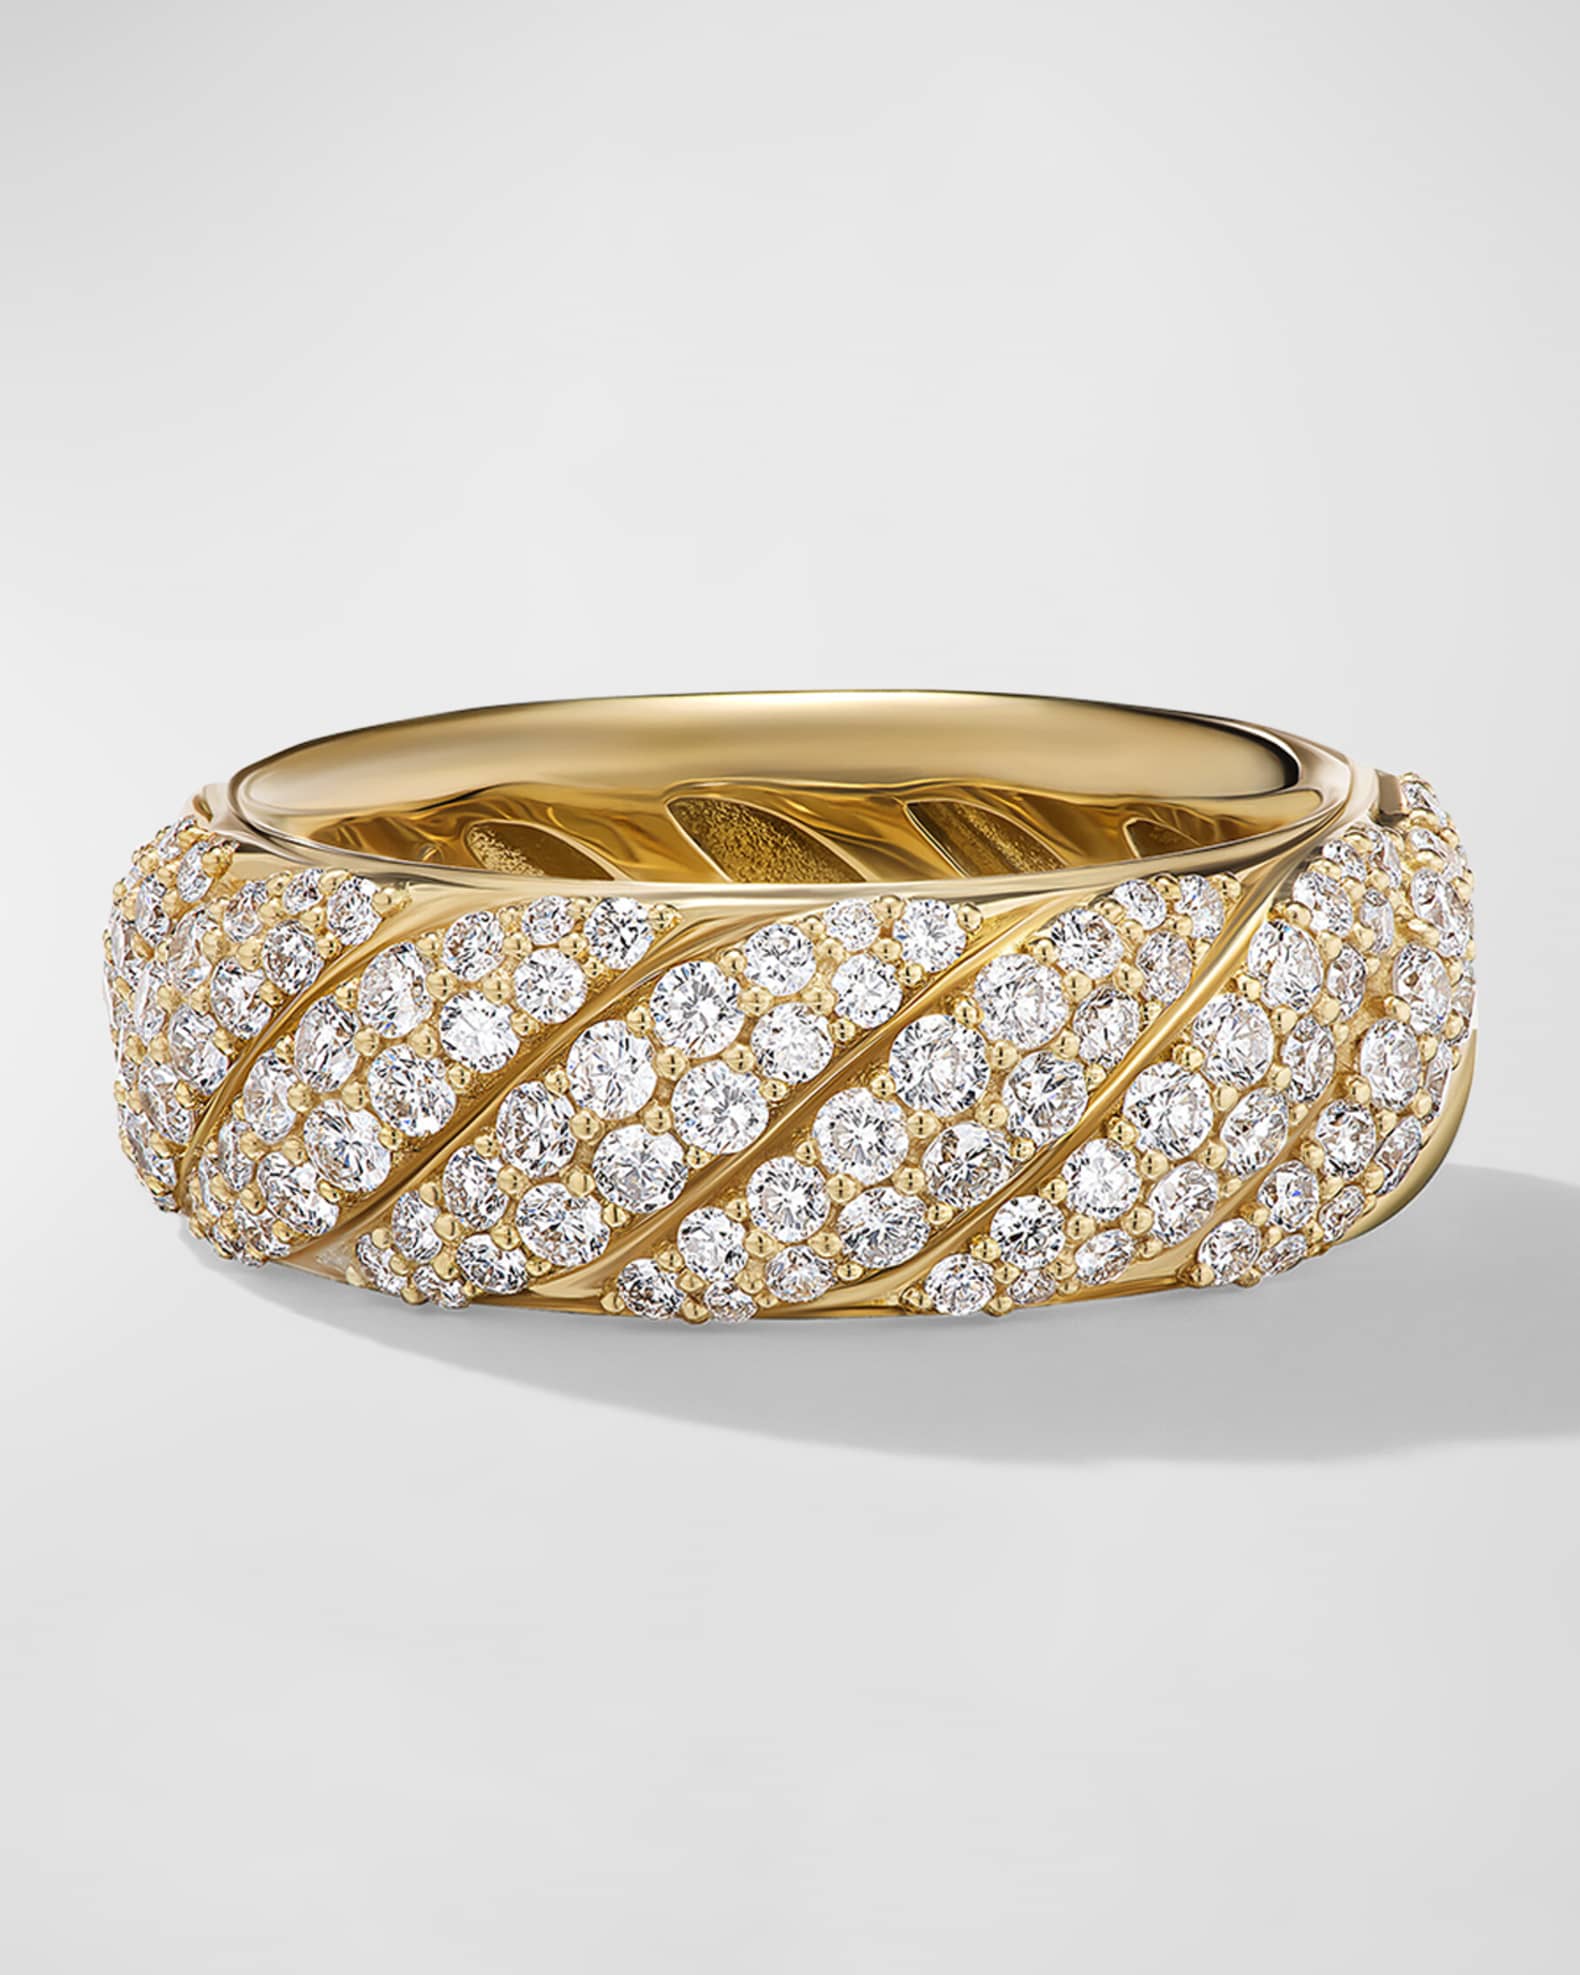 David Yurman Sculpted Cable Ring with Diamonds in 18K Gold, 7.5mm, Size ...